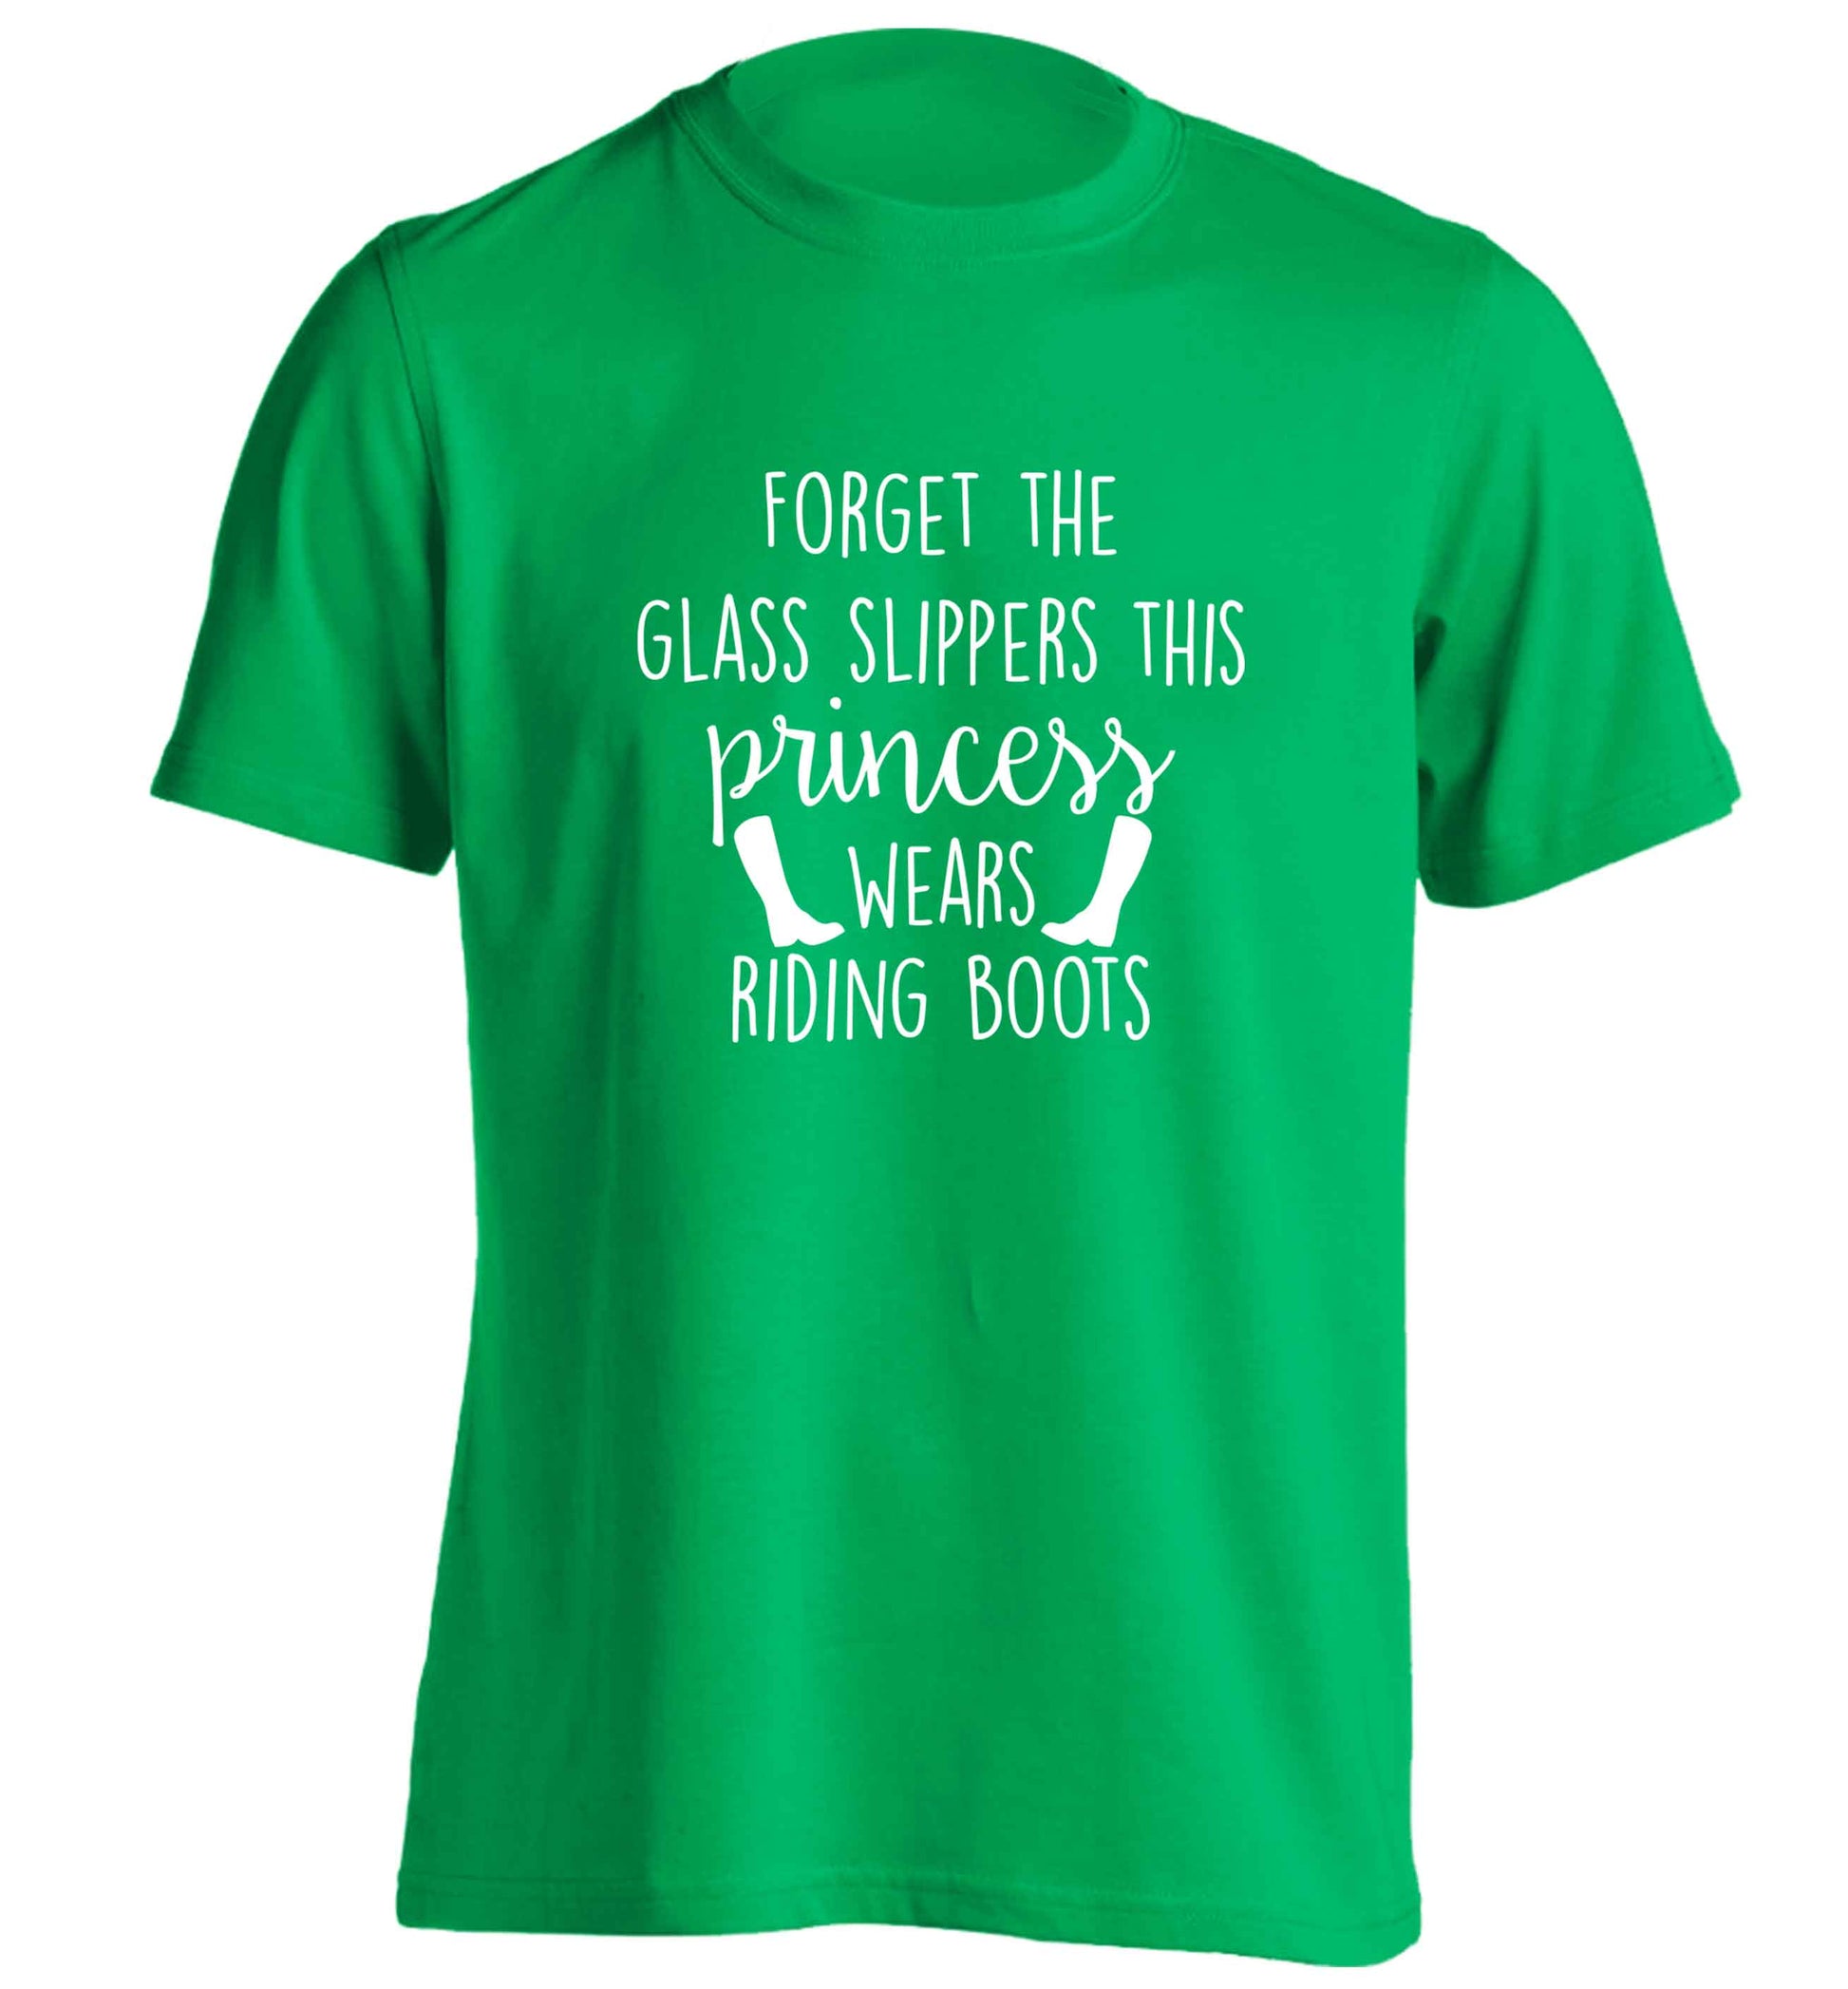 Forget the glass slippers this princess wears riding boots adults unisex green Tshirt 2XL